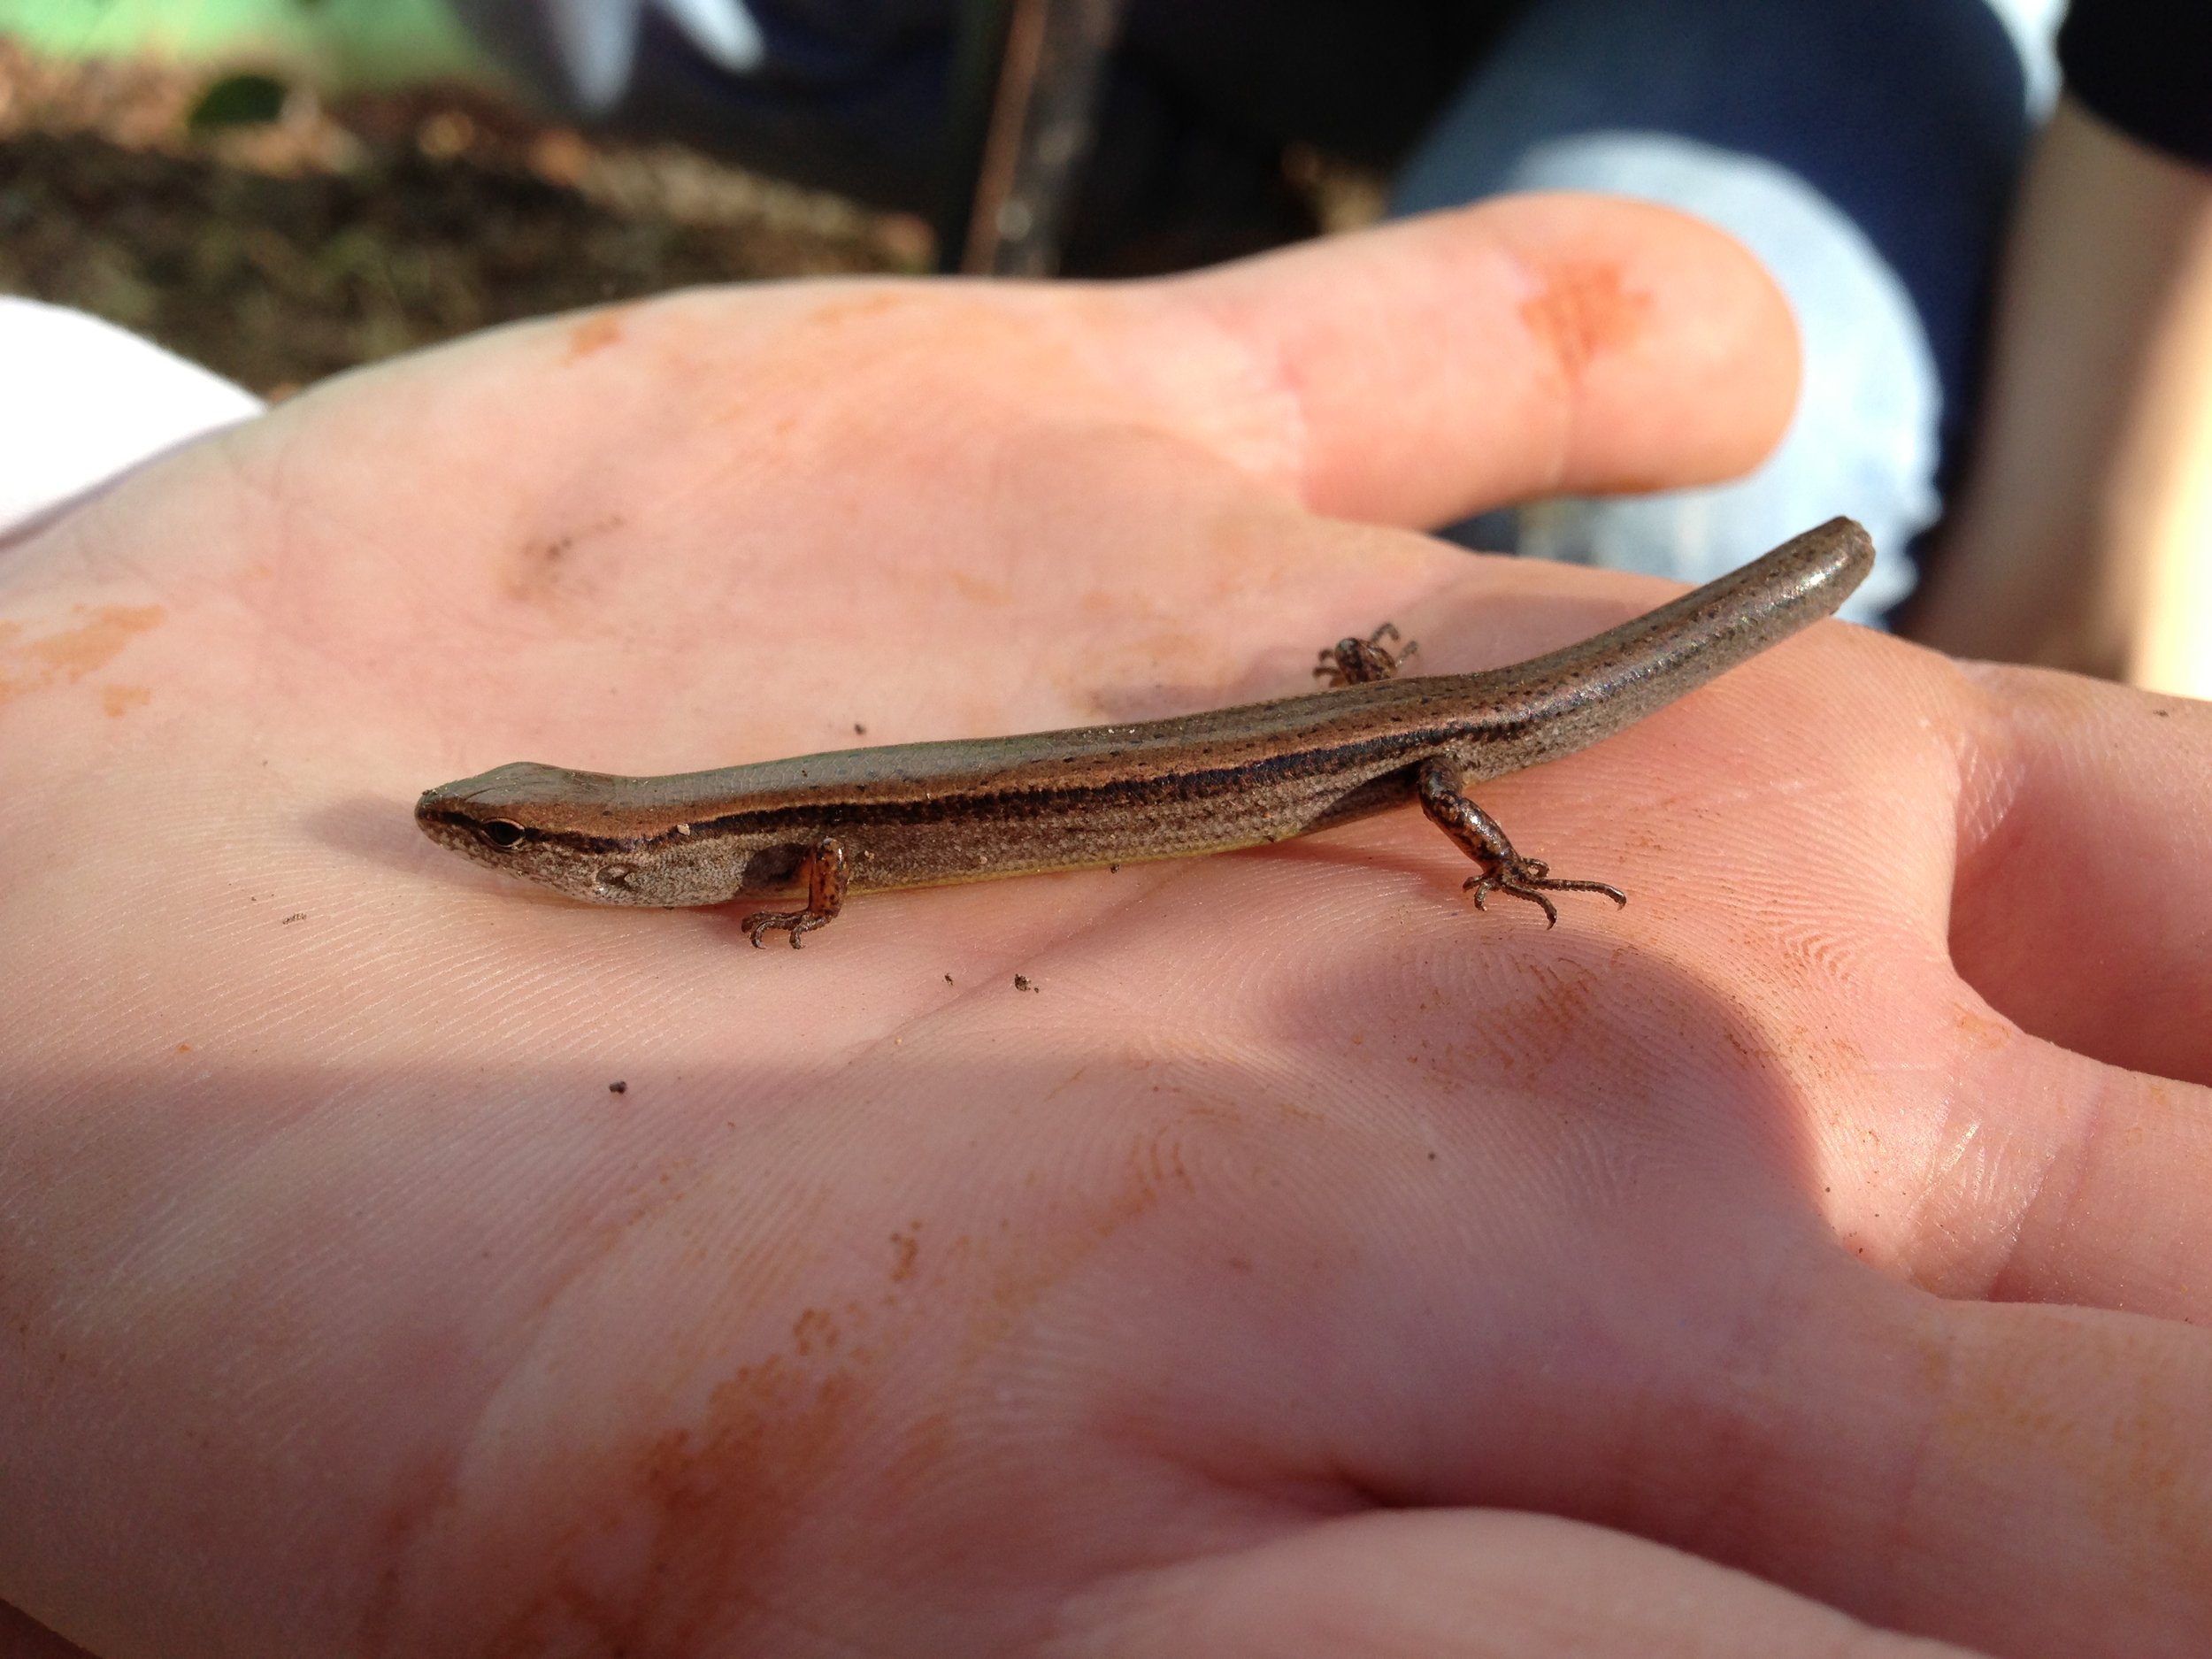 Ground Skink (Scincella lateralis)